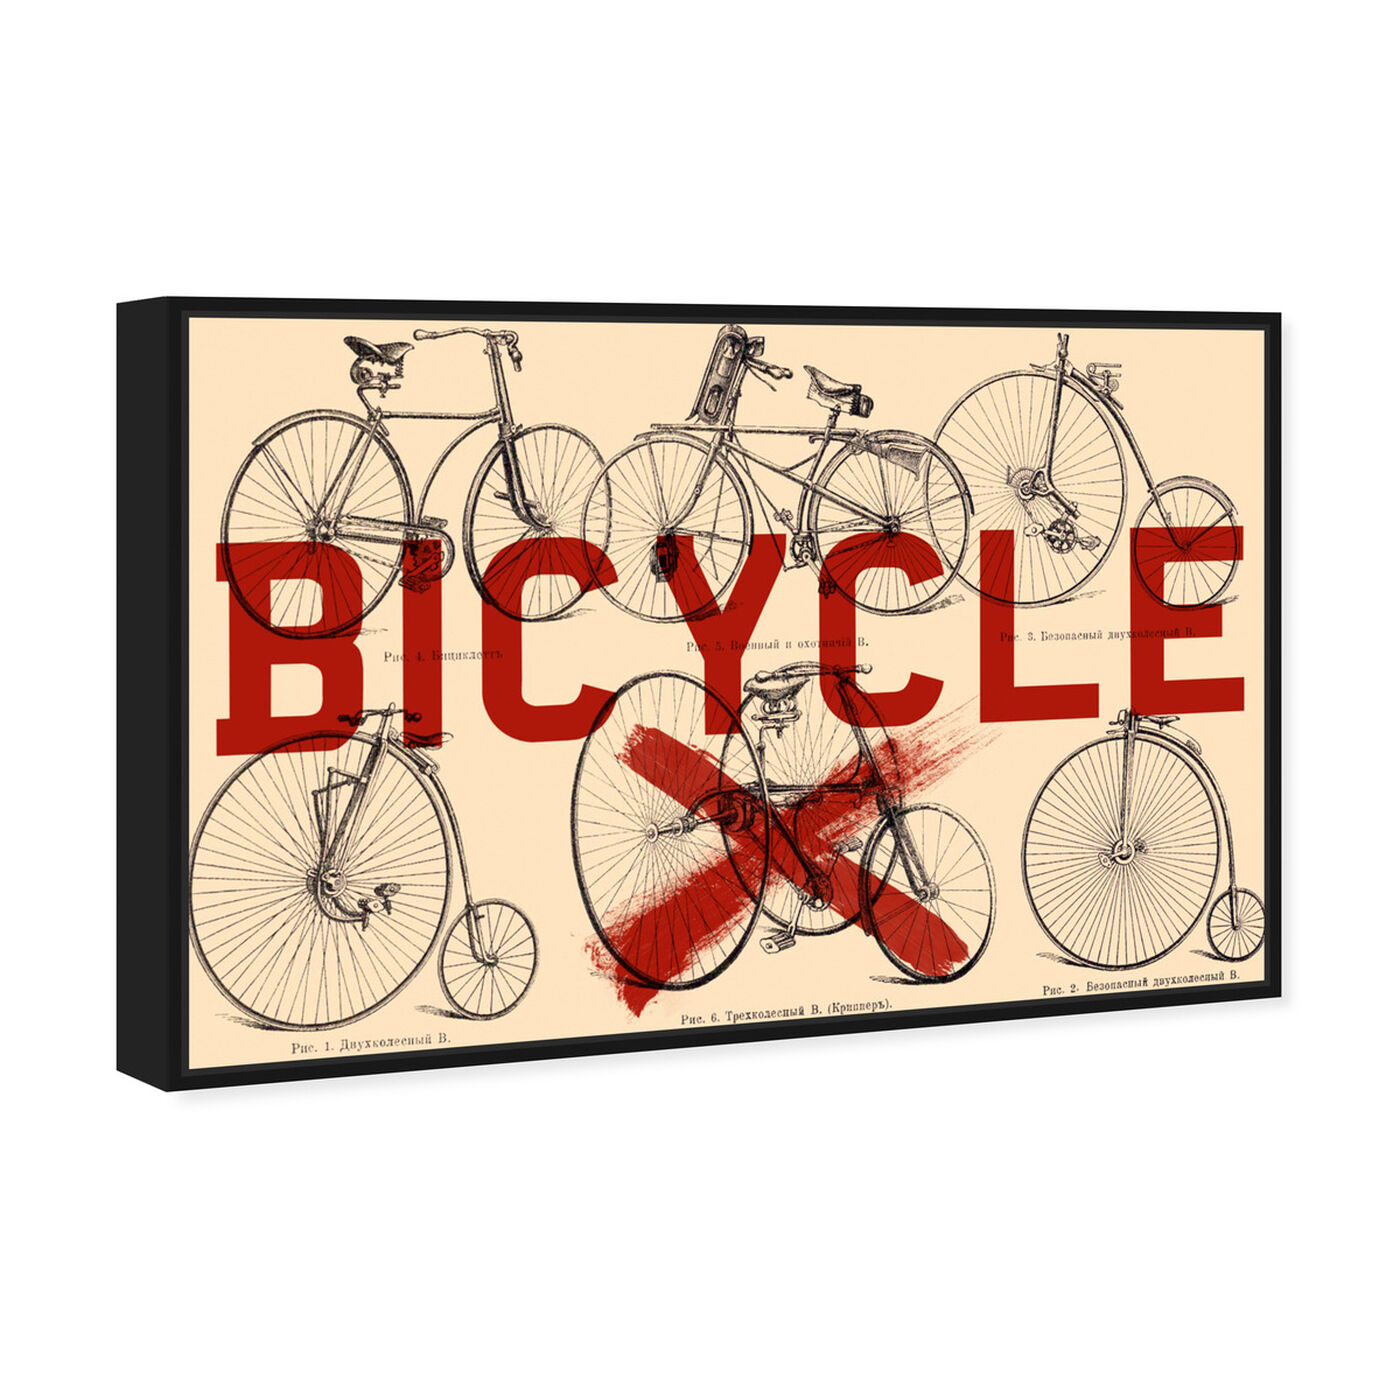 Angled view of Bicycle featuring transportation and bicycles art.